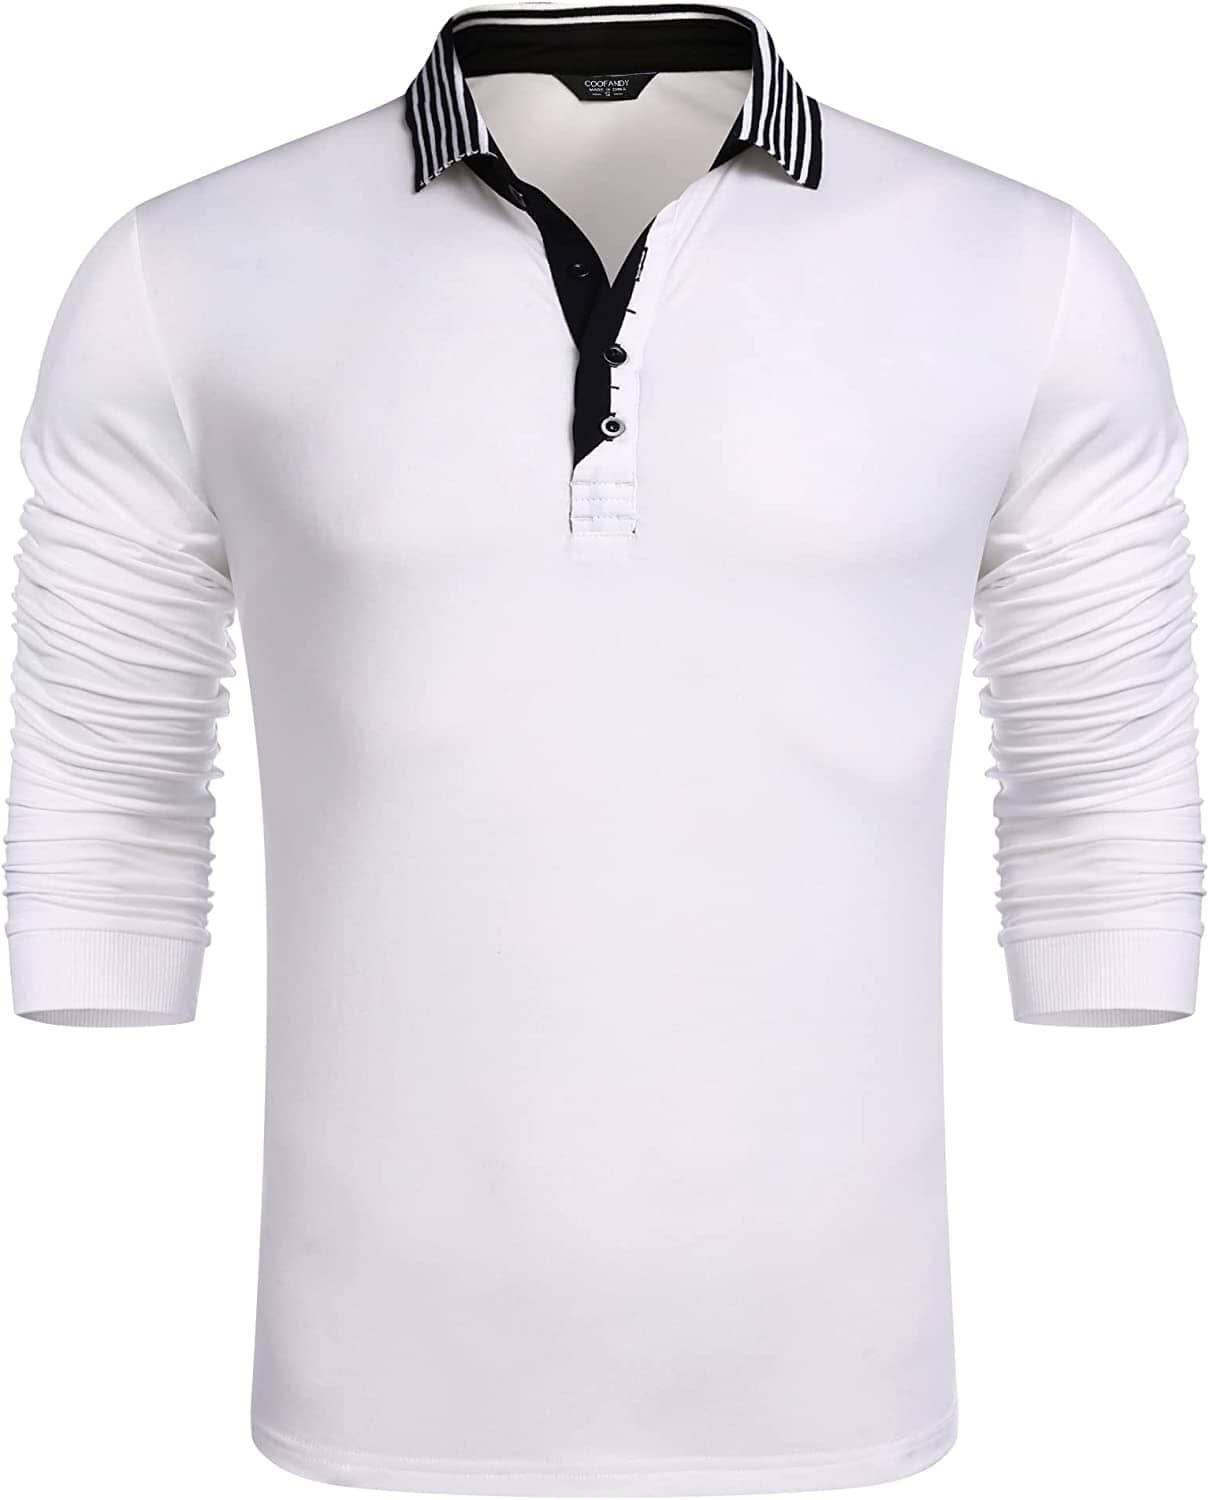 Slim Fit Cotton Polo Shirt (US Only) Shirts & Polos COOFANDY Store 01-white S 